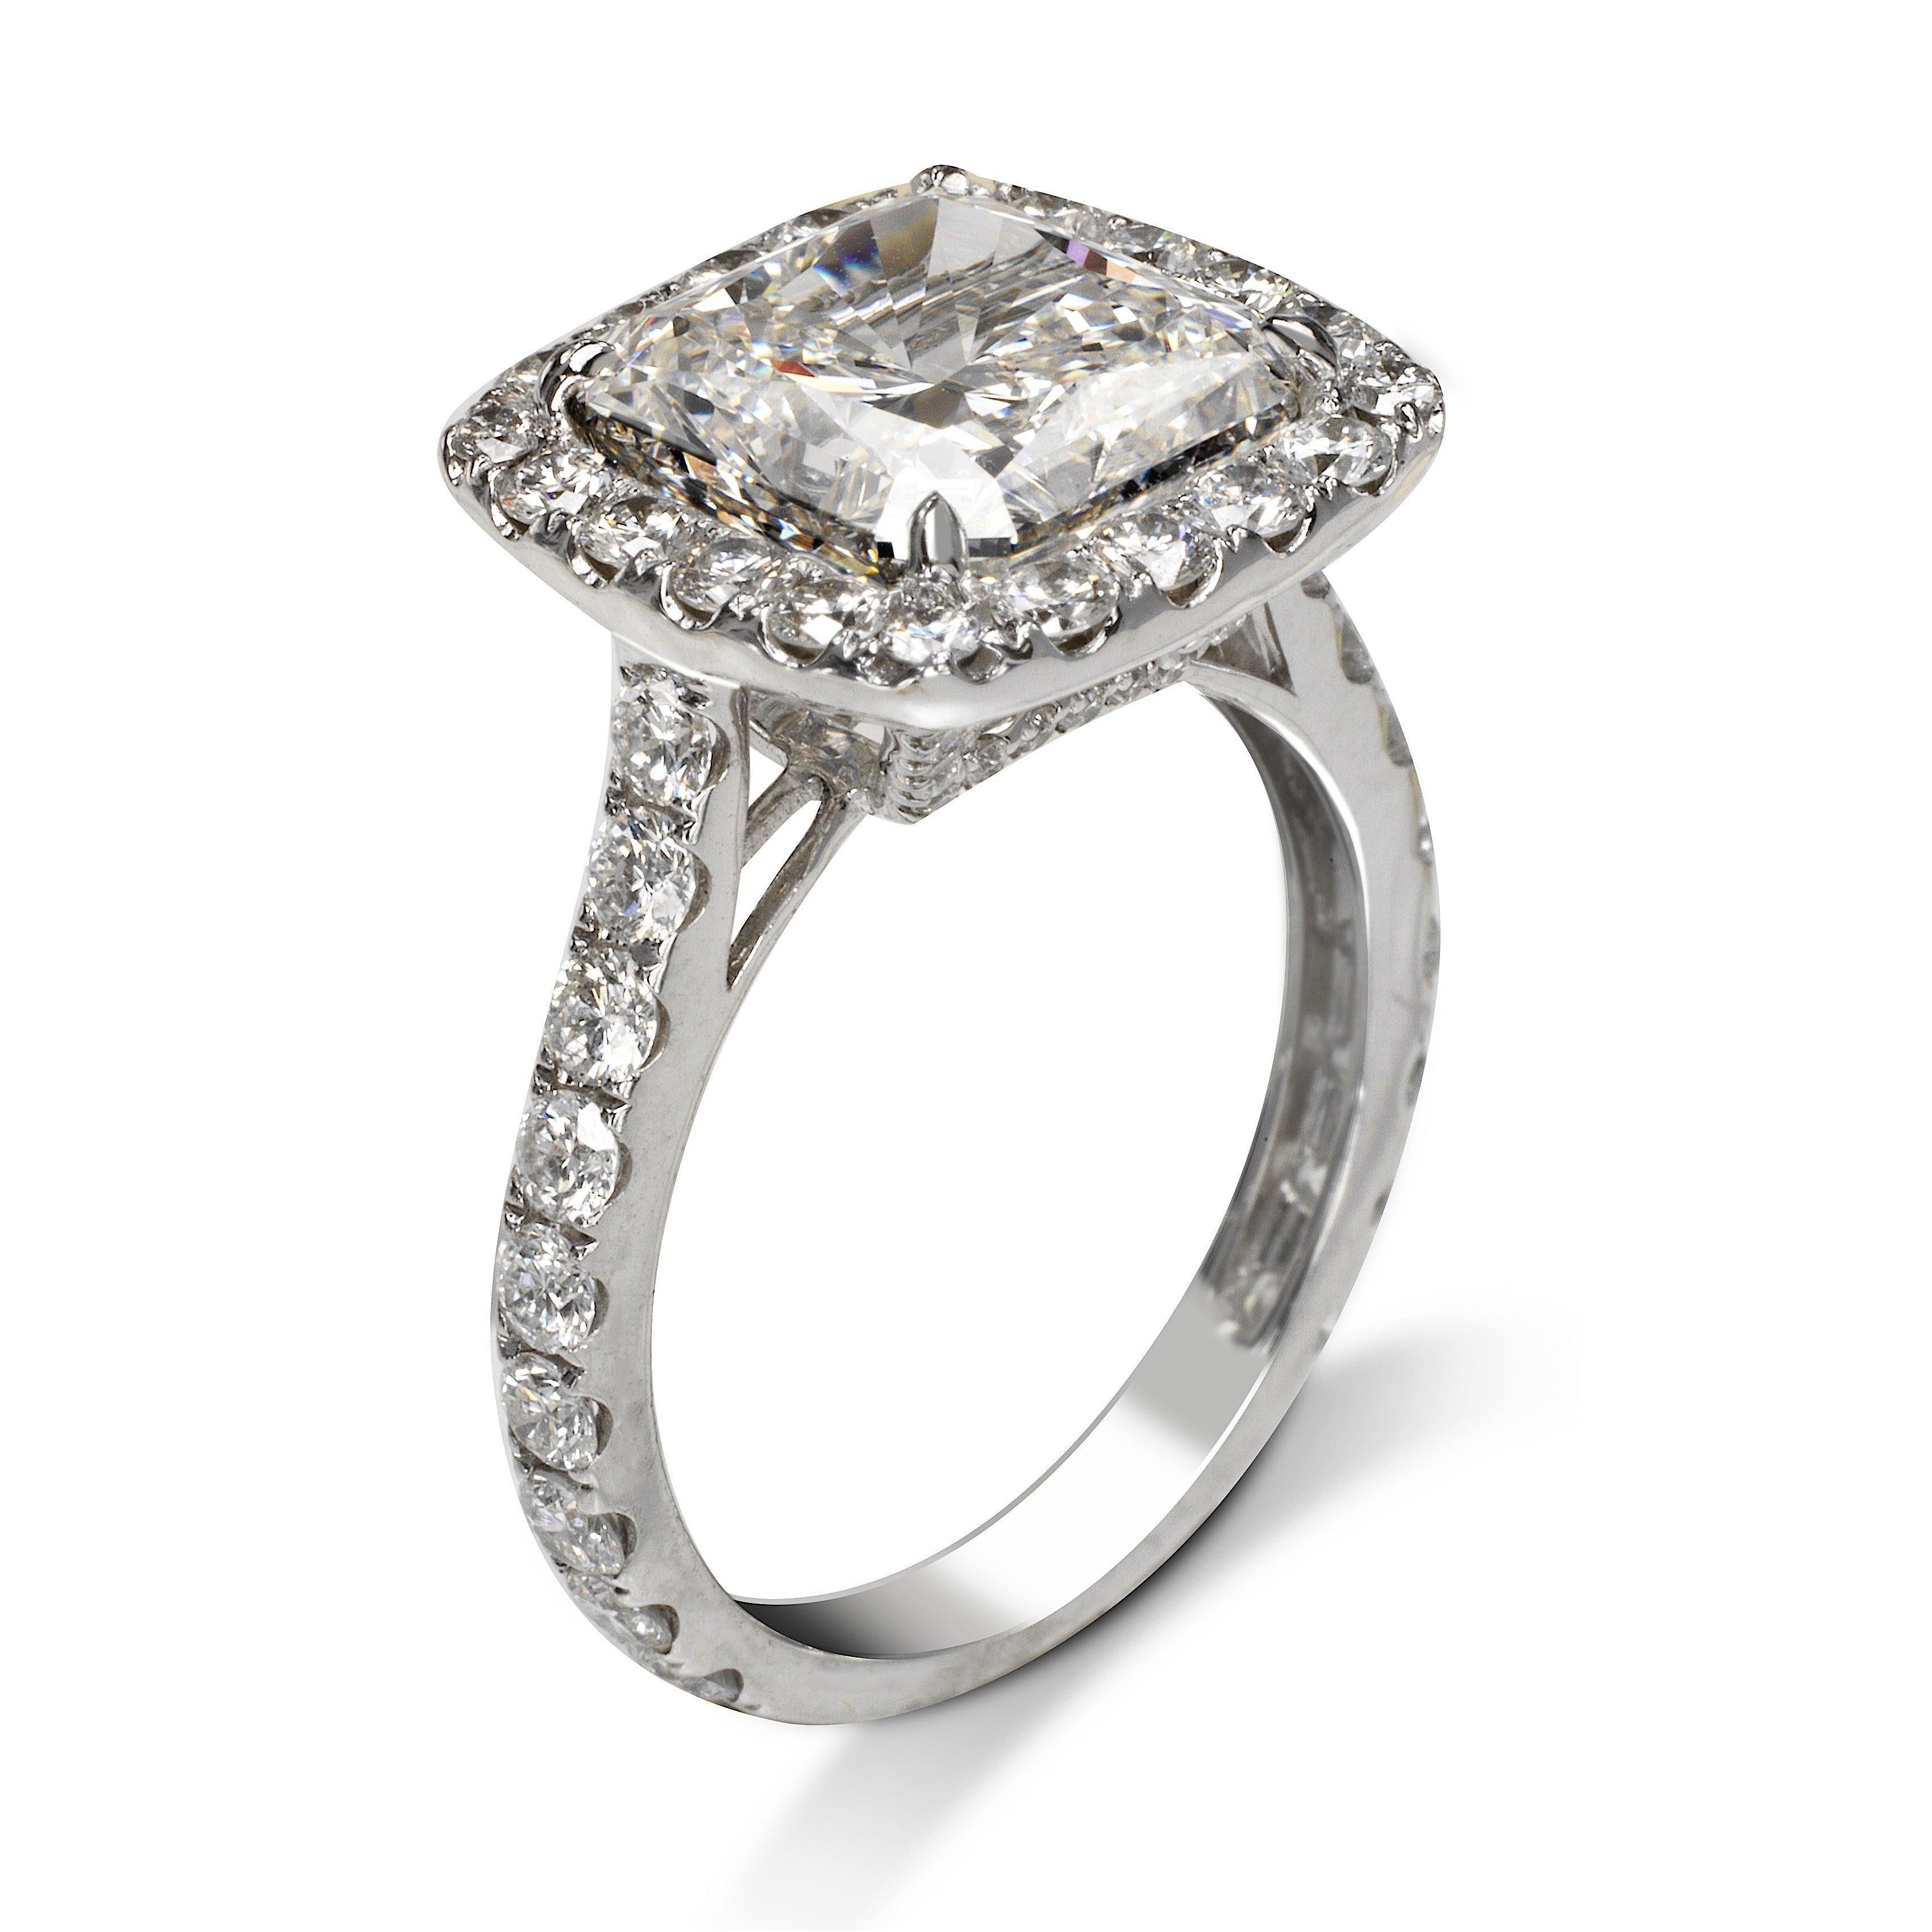 7 Carat Radiant Cut Diamond Engagement Ring GIA Certified I VVS1 In New Condition For Sale In New York, NY